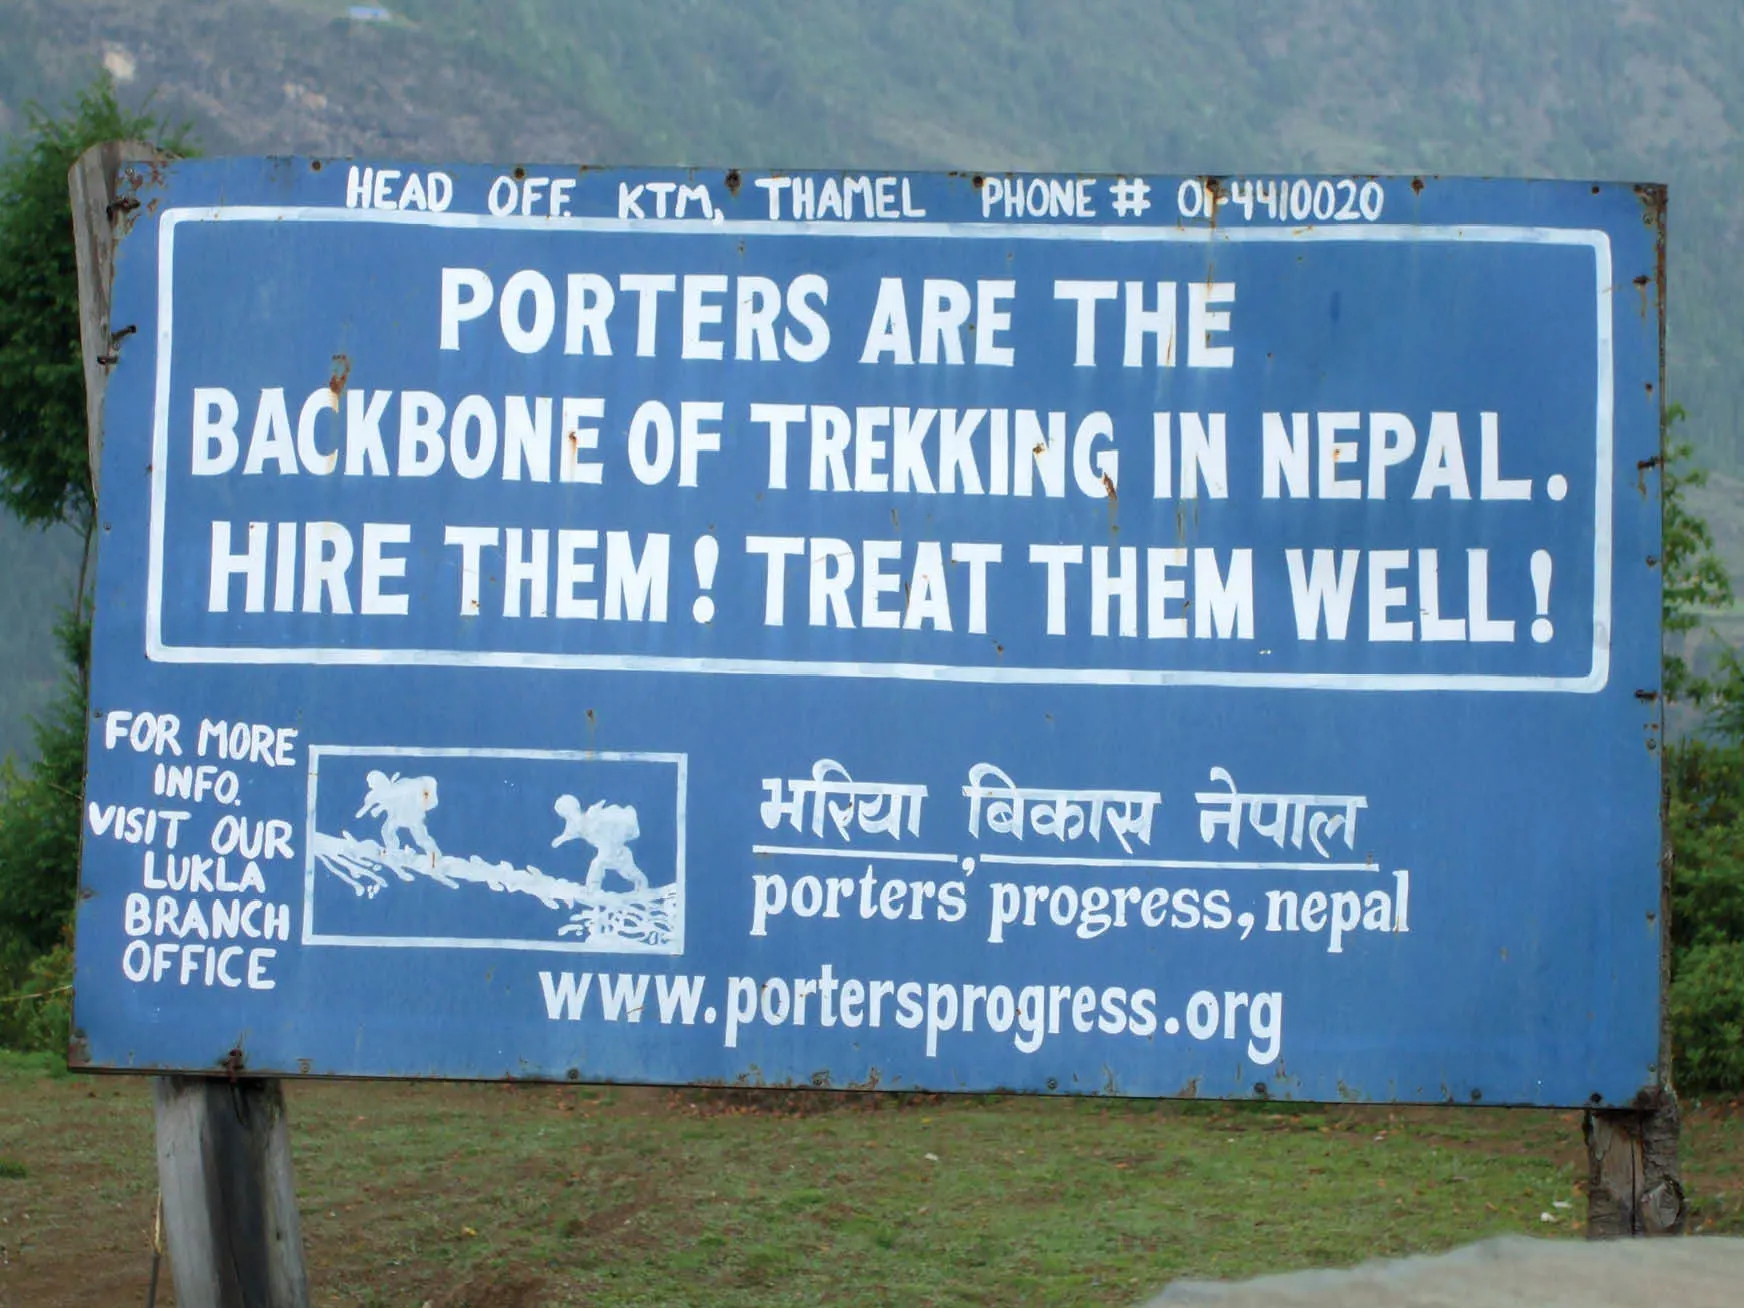 Sign for trekkers in Nepal that raises awareness of rights for sherpas and porters